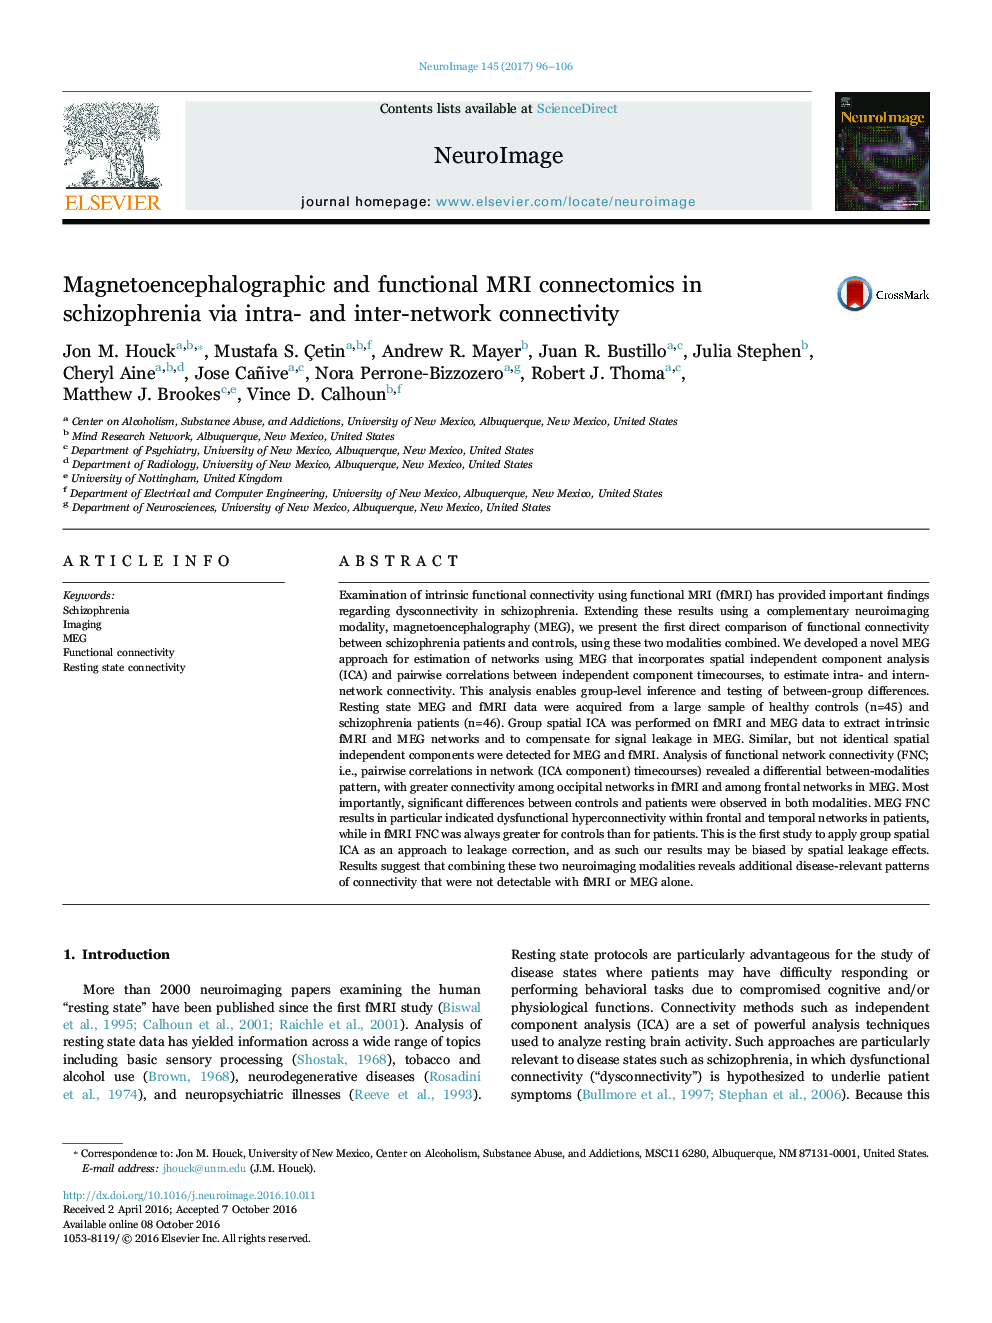 Magnetoencephalographic and functional MRI connectomics in schizophrenia via intra- and inter-network connectivity